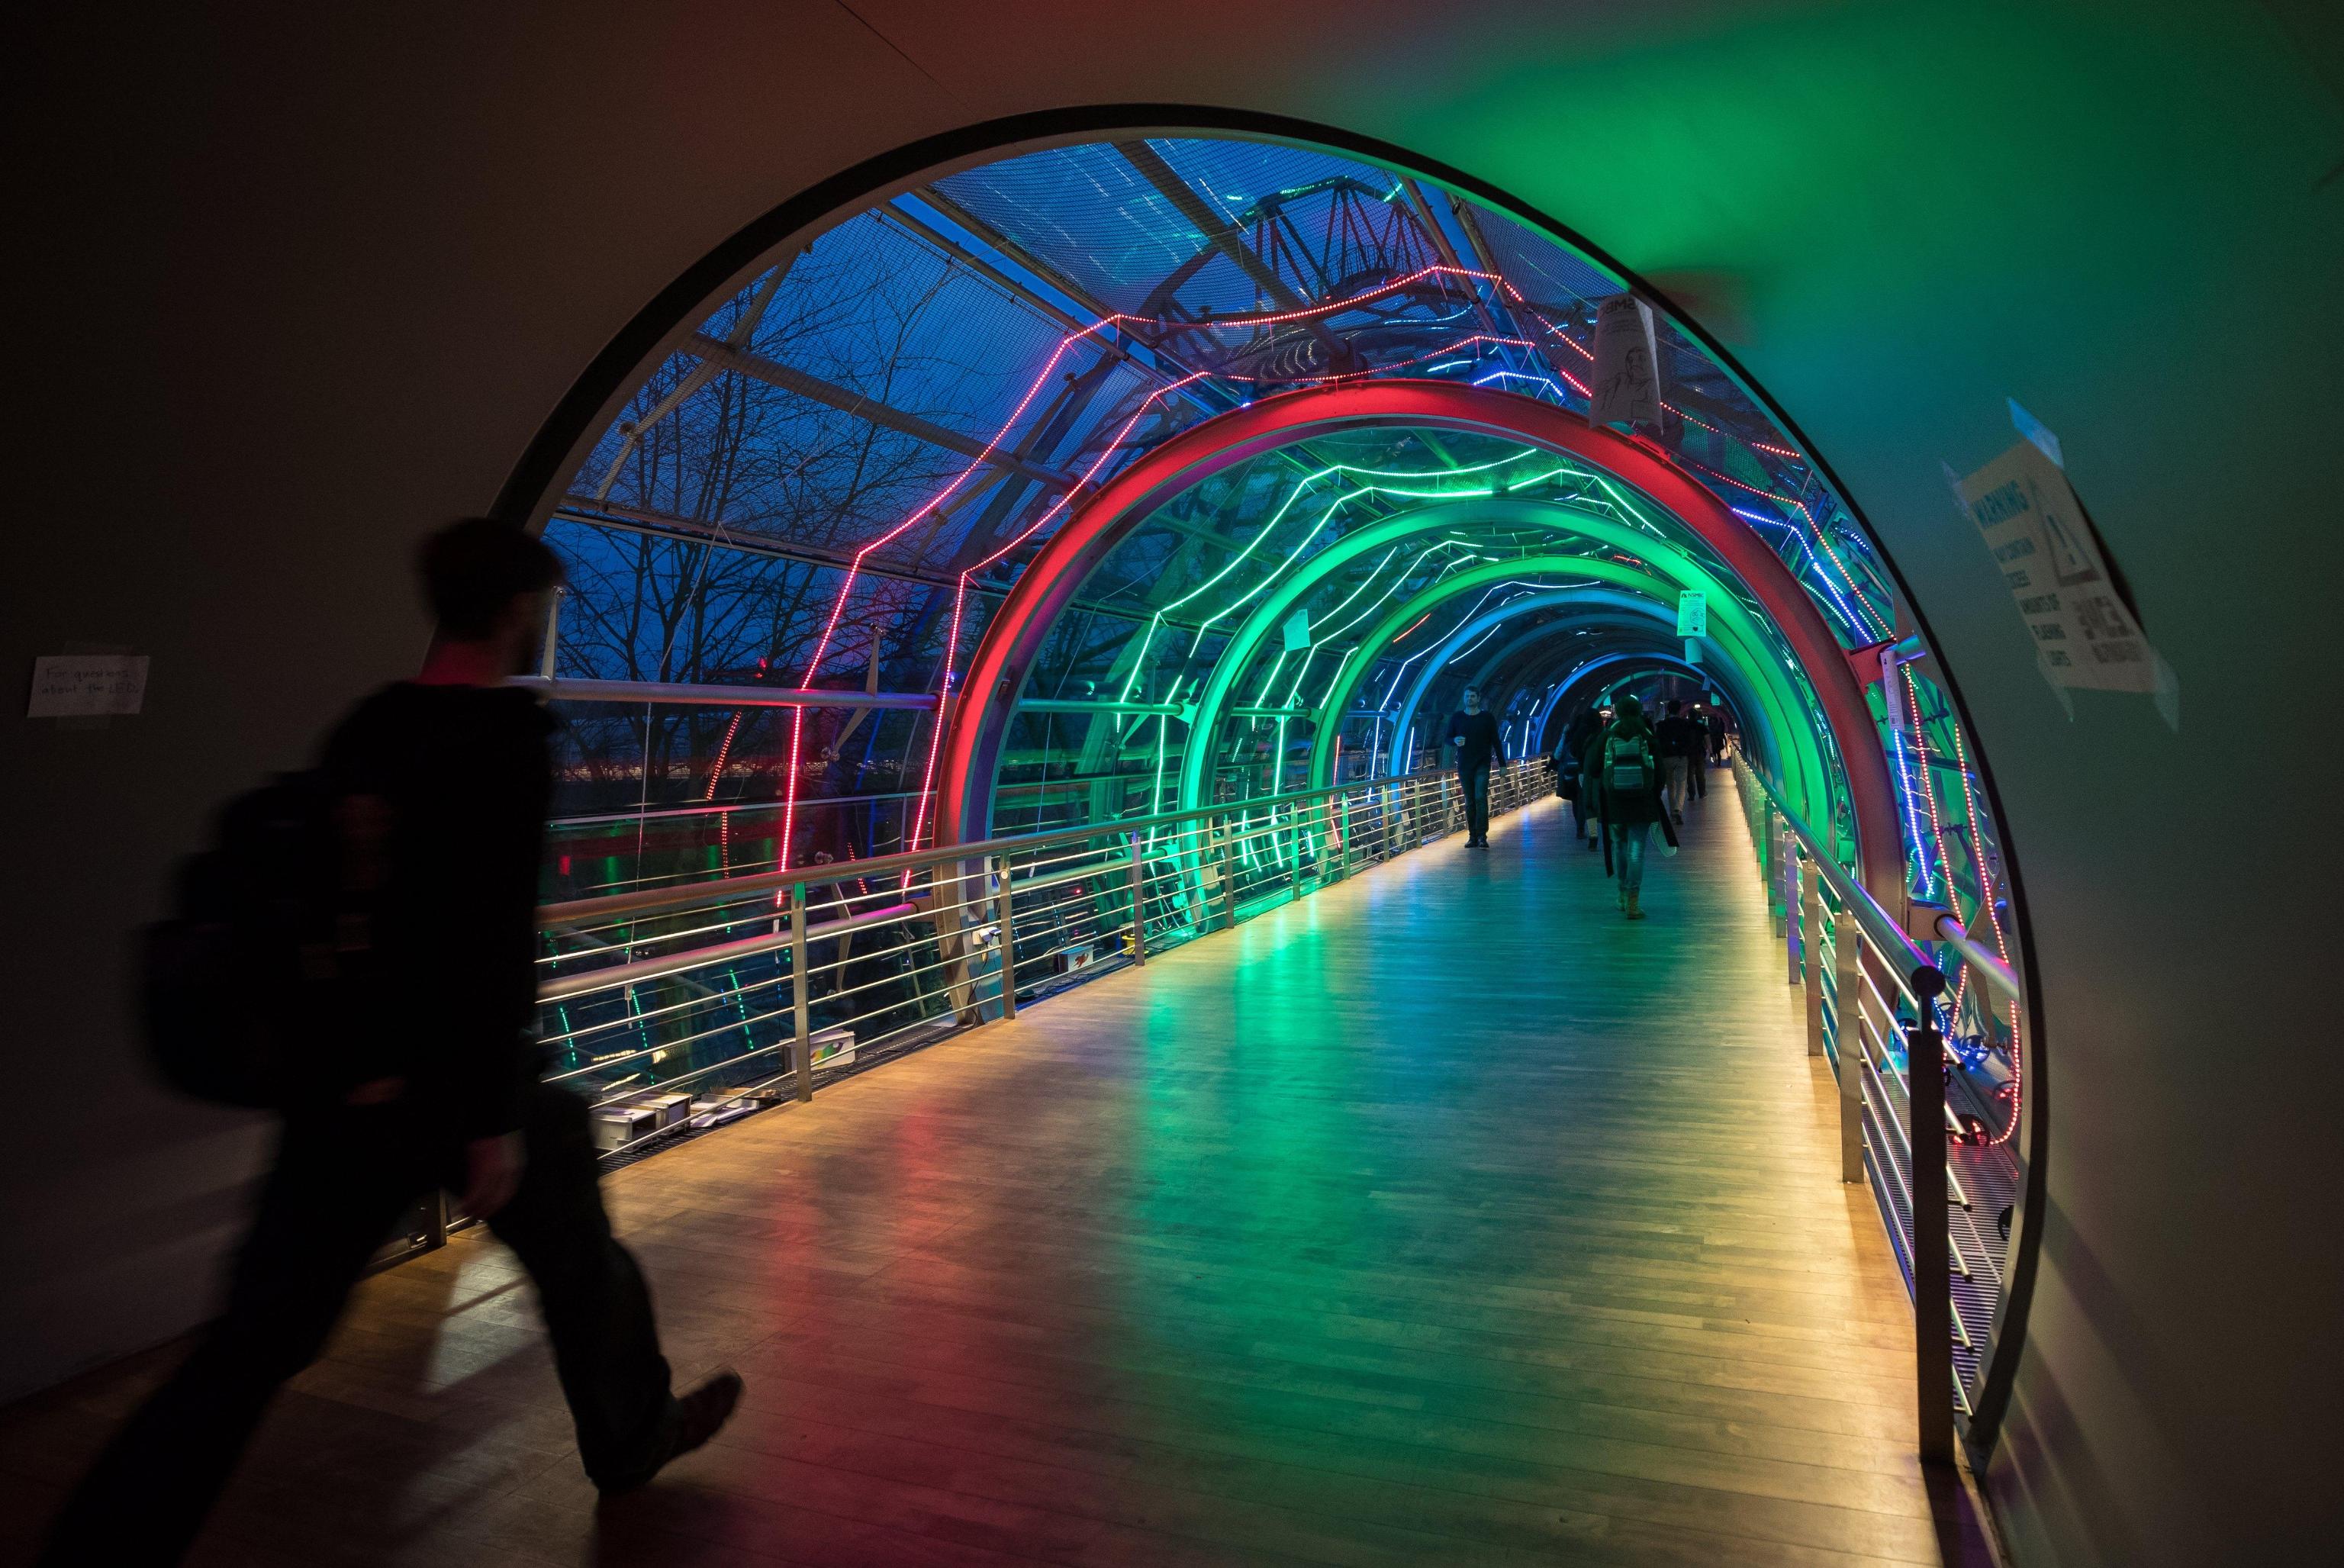 Visitors pass through a tunnel at the Chaos Communication Congress (CCC) in Leipzig, Germany, 27 December 2017. The world's largest non-commercial hacker meeting takes place until 30 December 2017.  EPA/HAYOUNG JEON